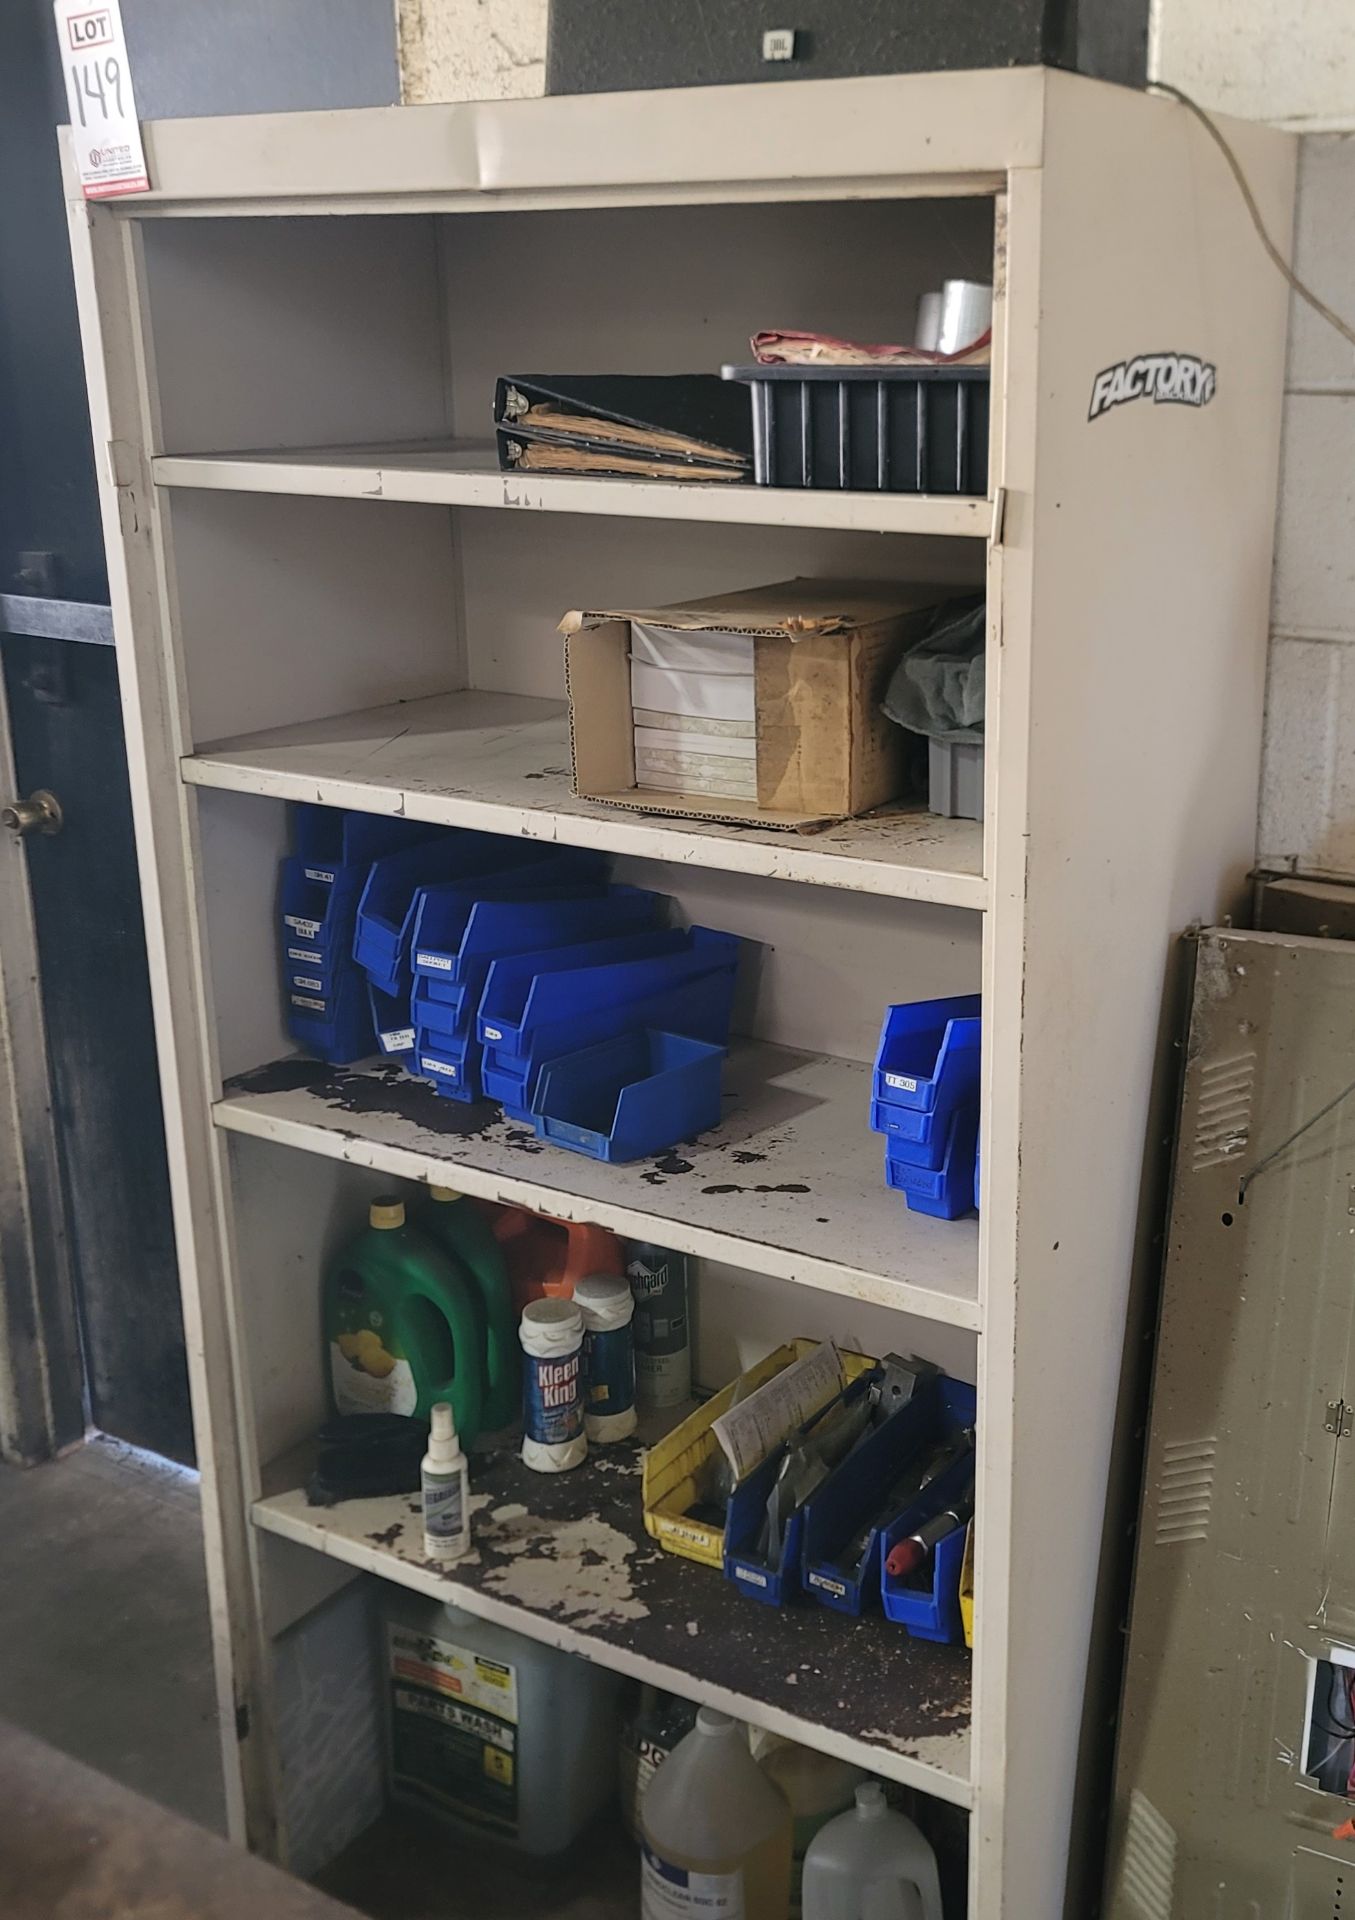 STEEL SHELF UNIT, 3' X 18" X 6' HT, CONTENTS NOT INCLUDED